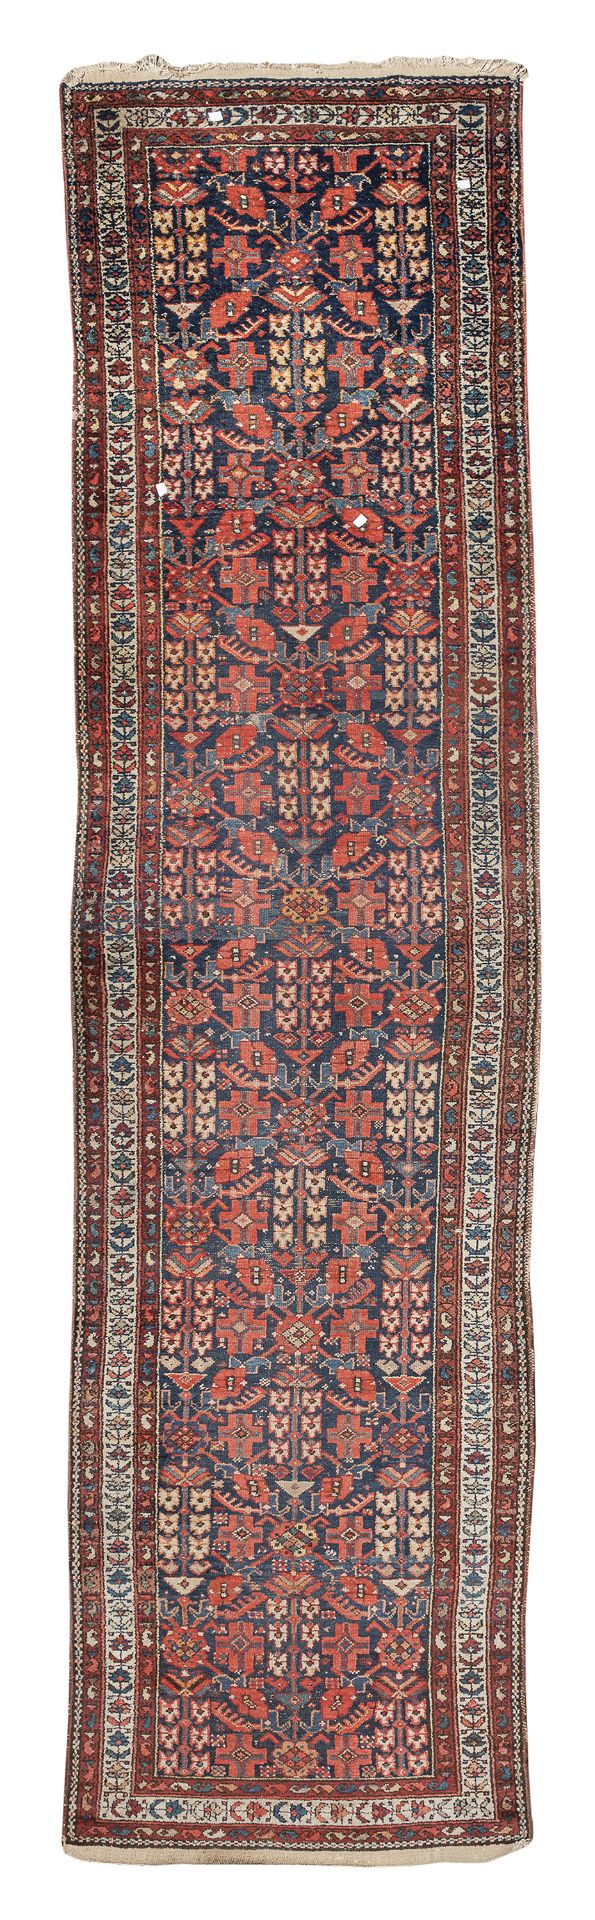 MALAYER RUNNER EARLY 20TH CENTURY